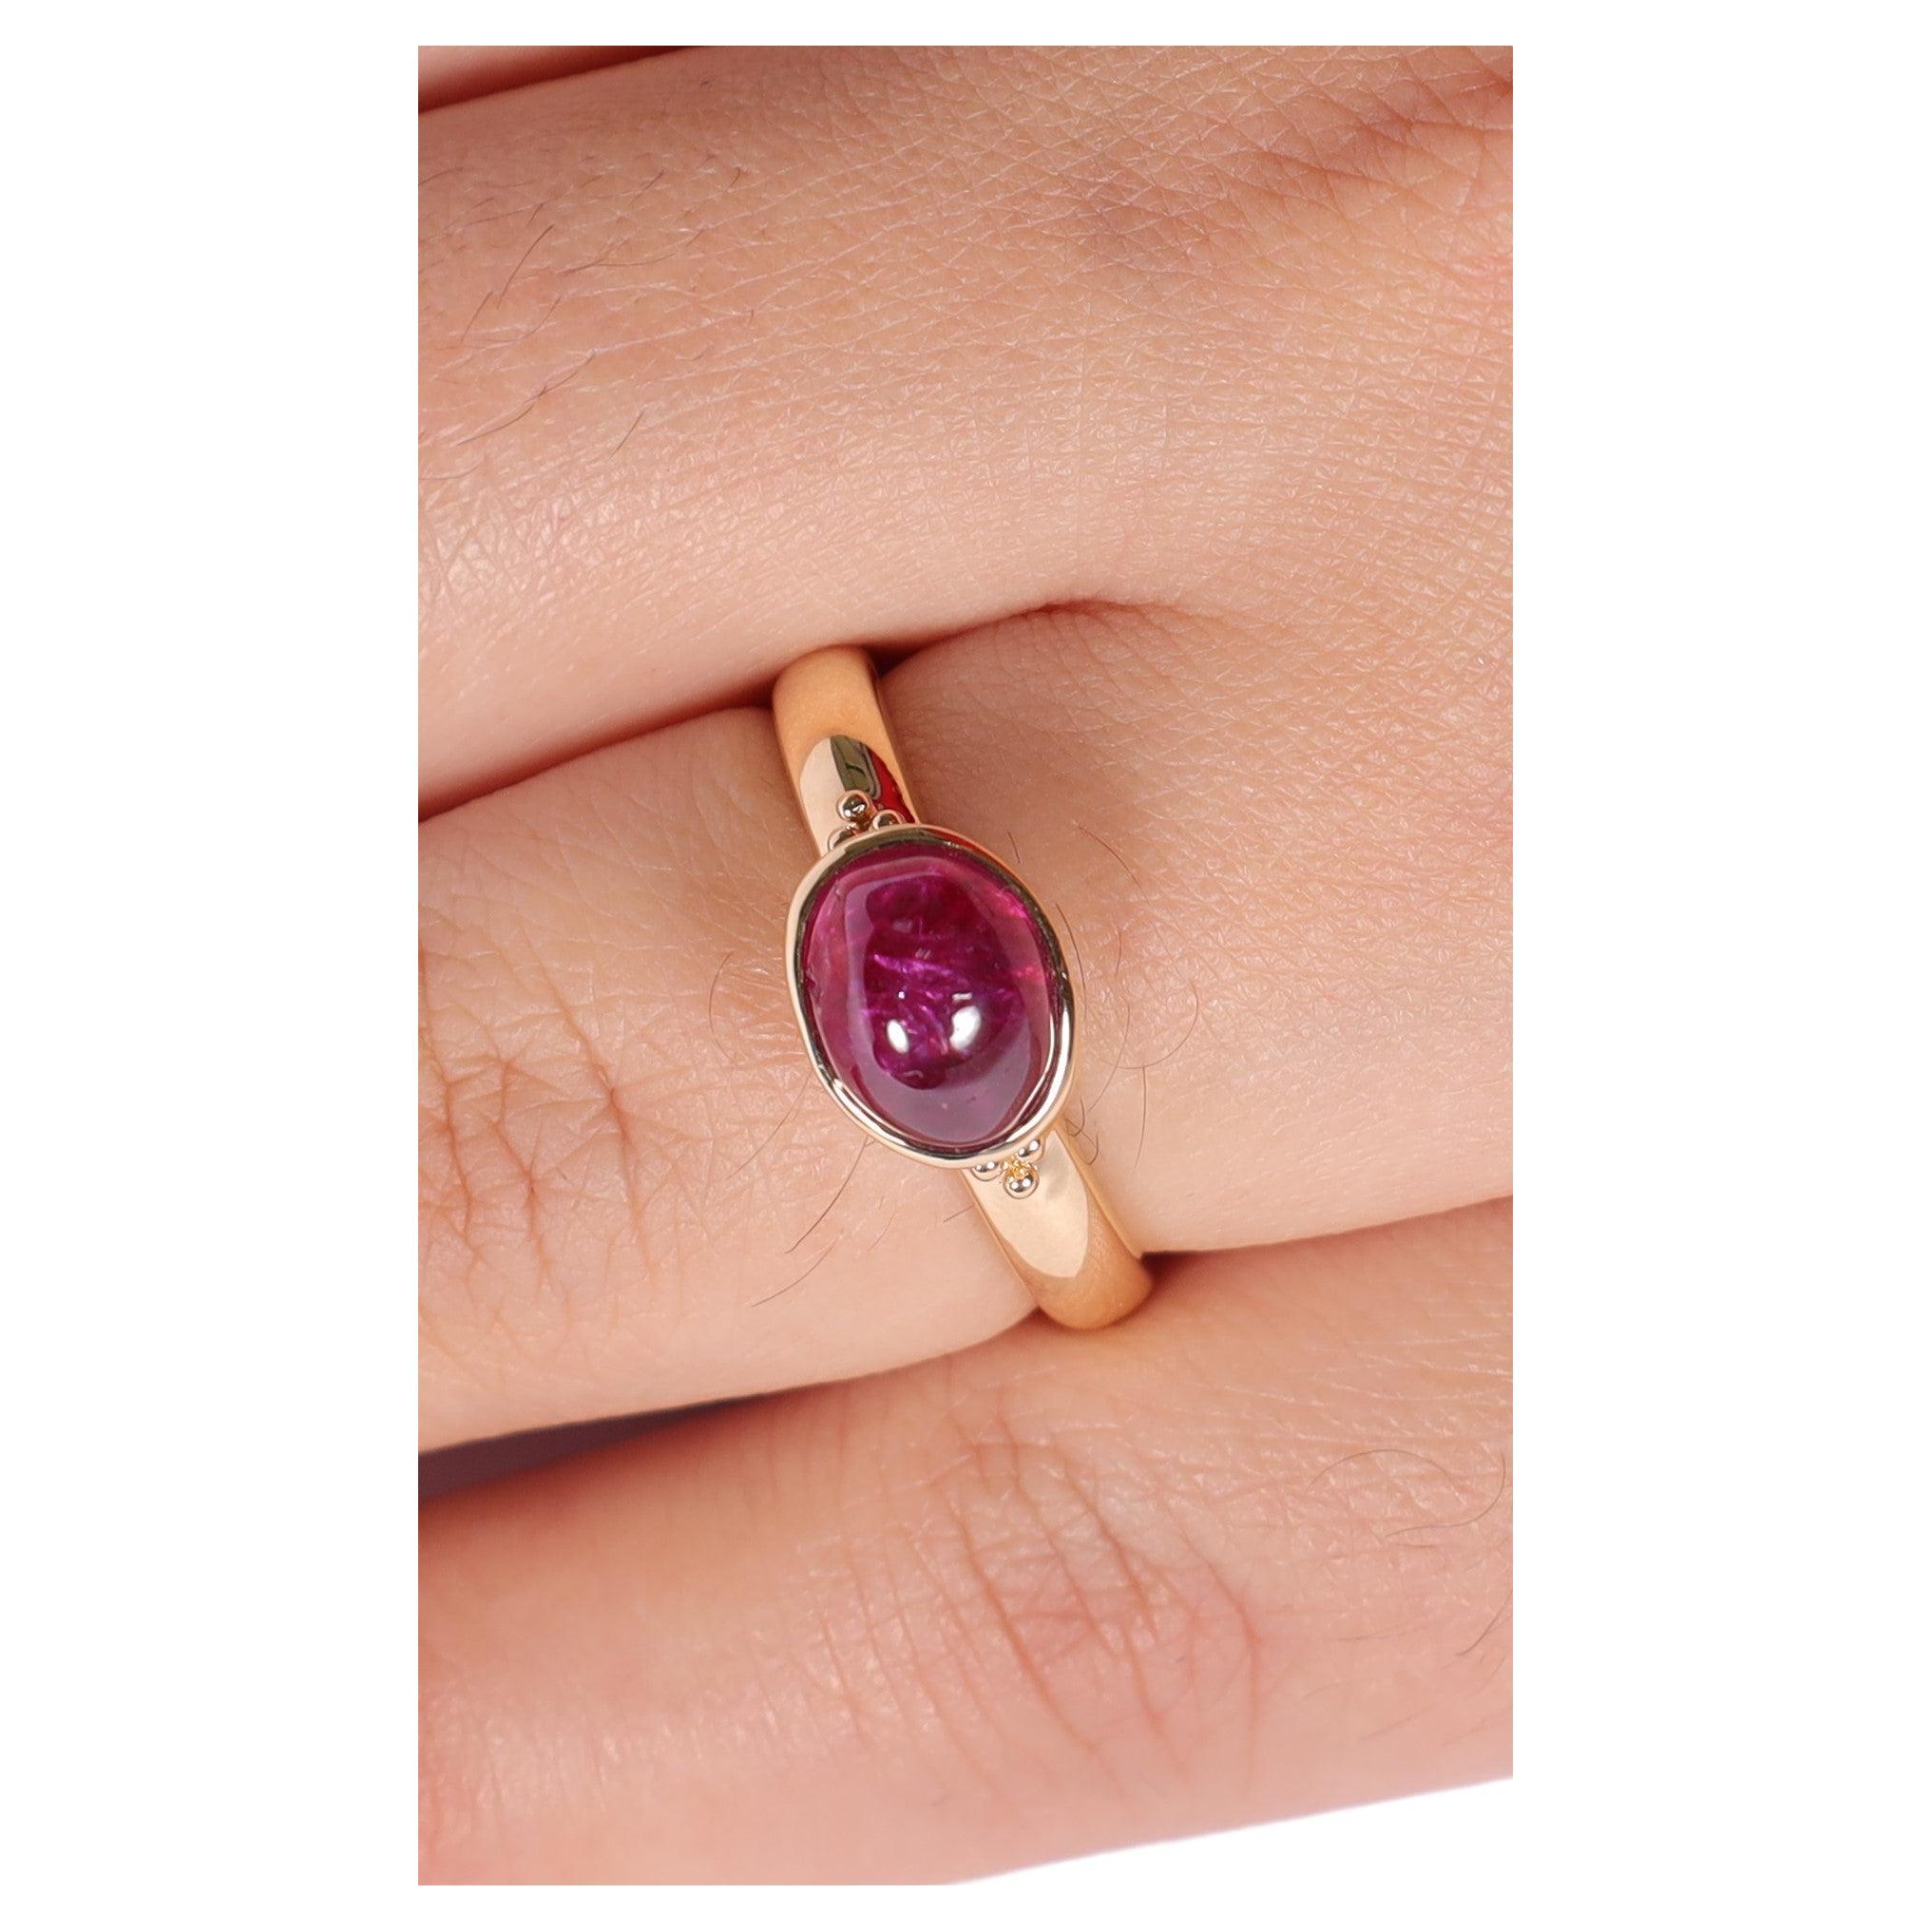 3.48 Carat Burma Ruby Natural  18Kt Solid Yellow Gold Solitaire Ring 